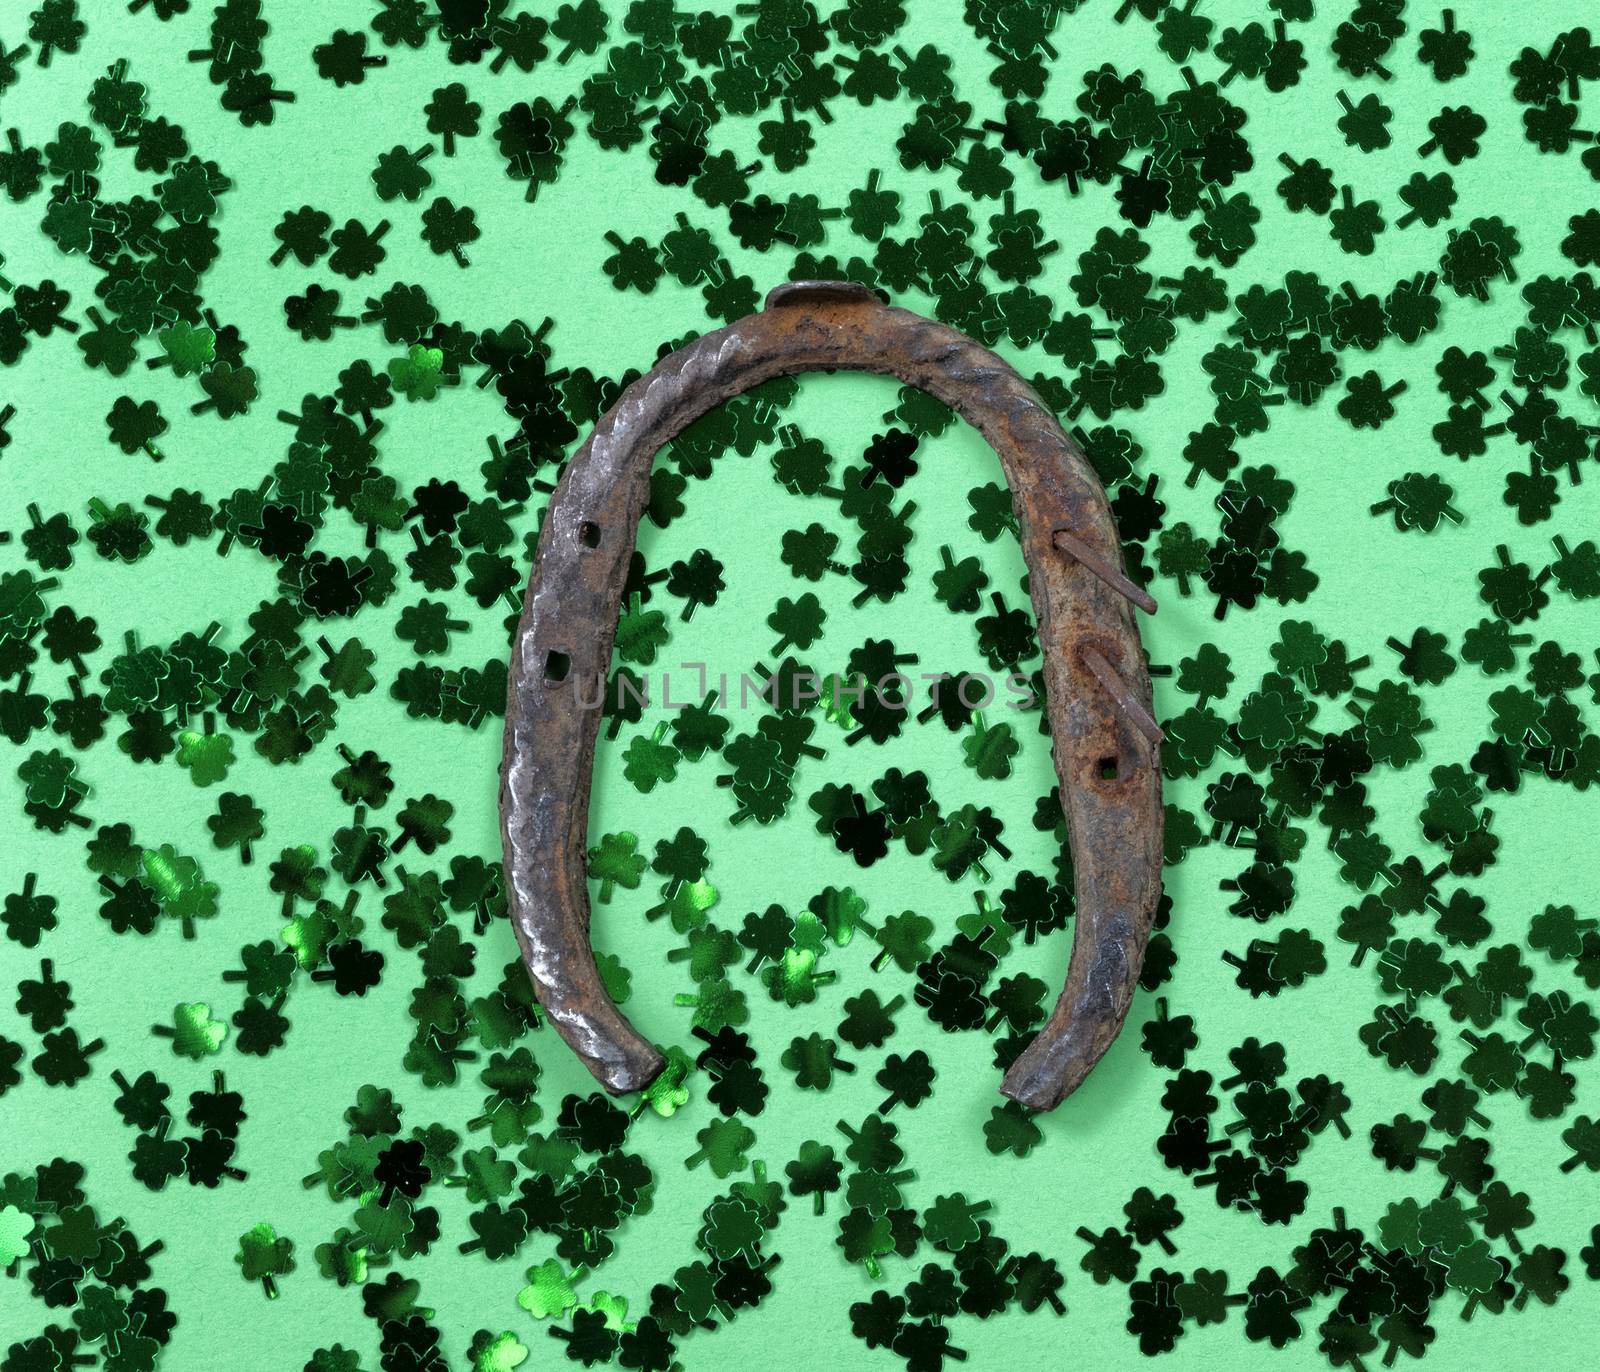 Saint Patricks Day with shamrocks and rusty horseshoe on green background in filled frame format 